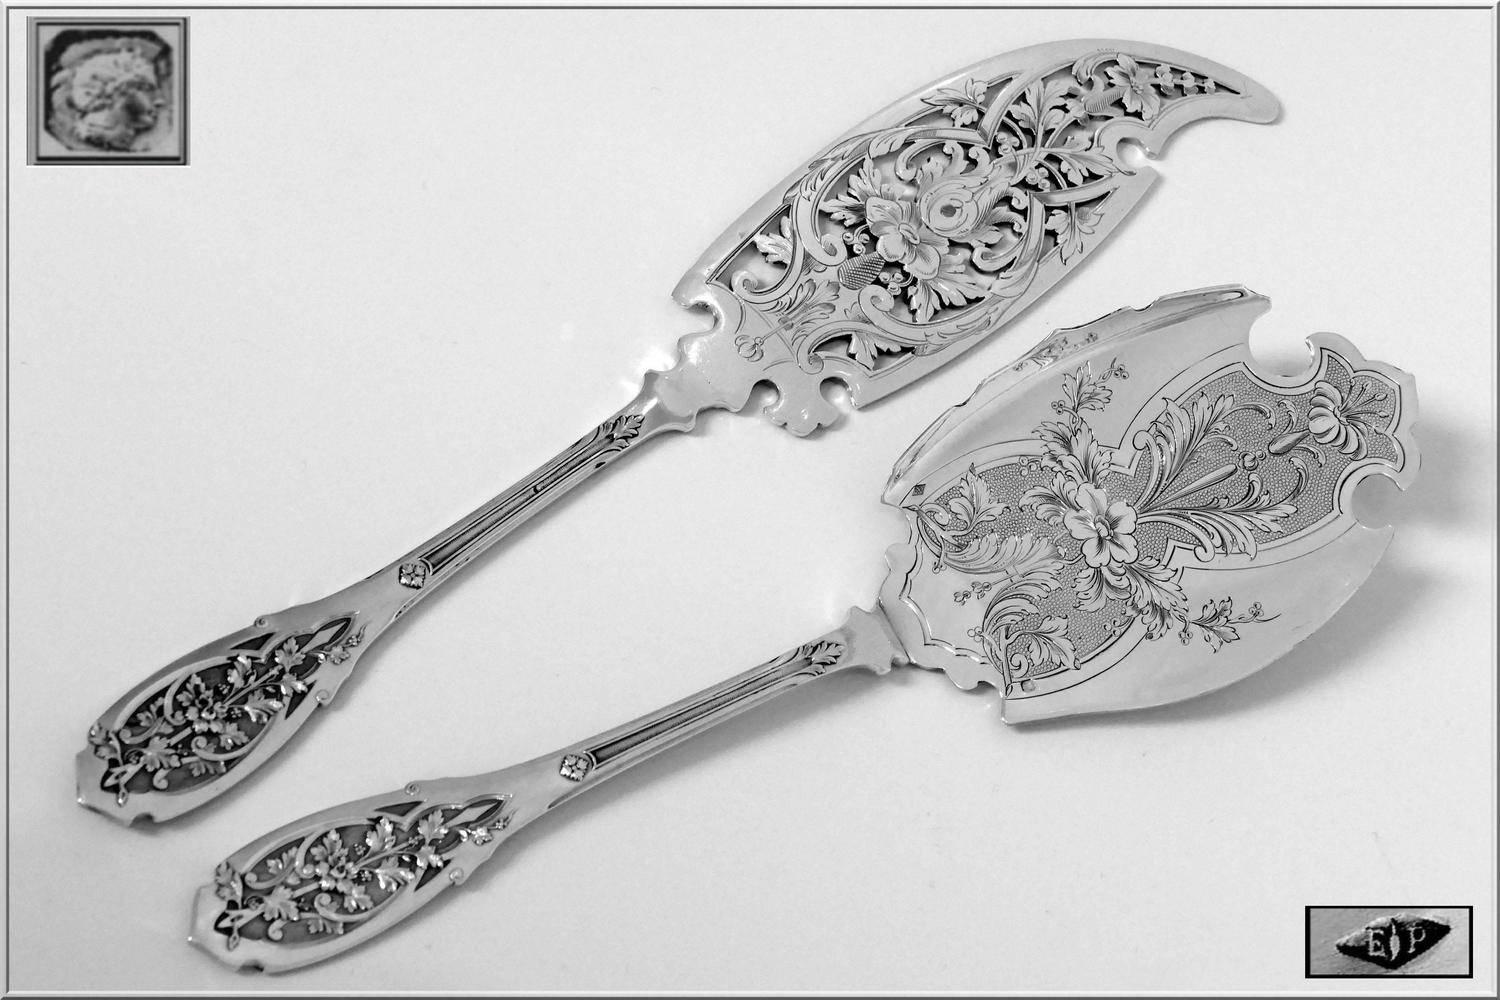 Head of minerve 1st titre for 950/1000 French sterling silver guarantee.

The design and workmanship of this set is exceptional. Absolutely gorgeous ice cream set, flowers, vine leaves, bunch of grapes and foliage. Sophisticated and unusual Art